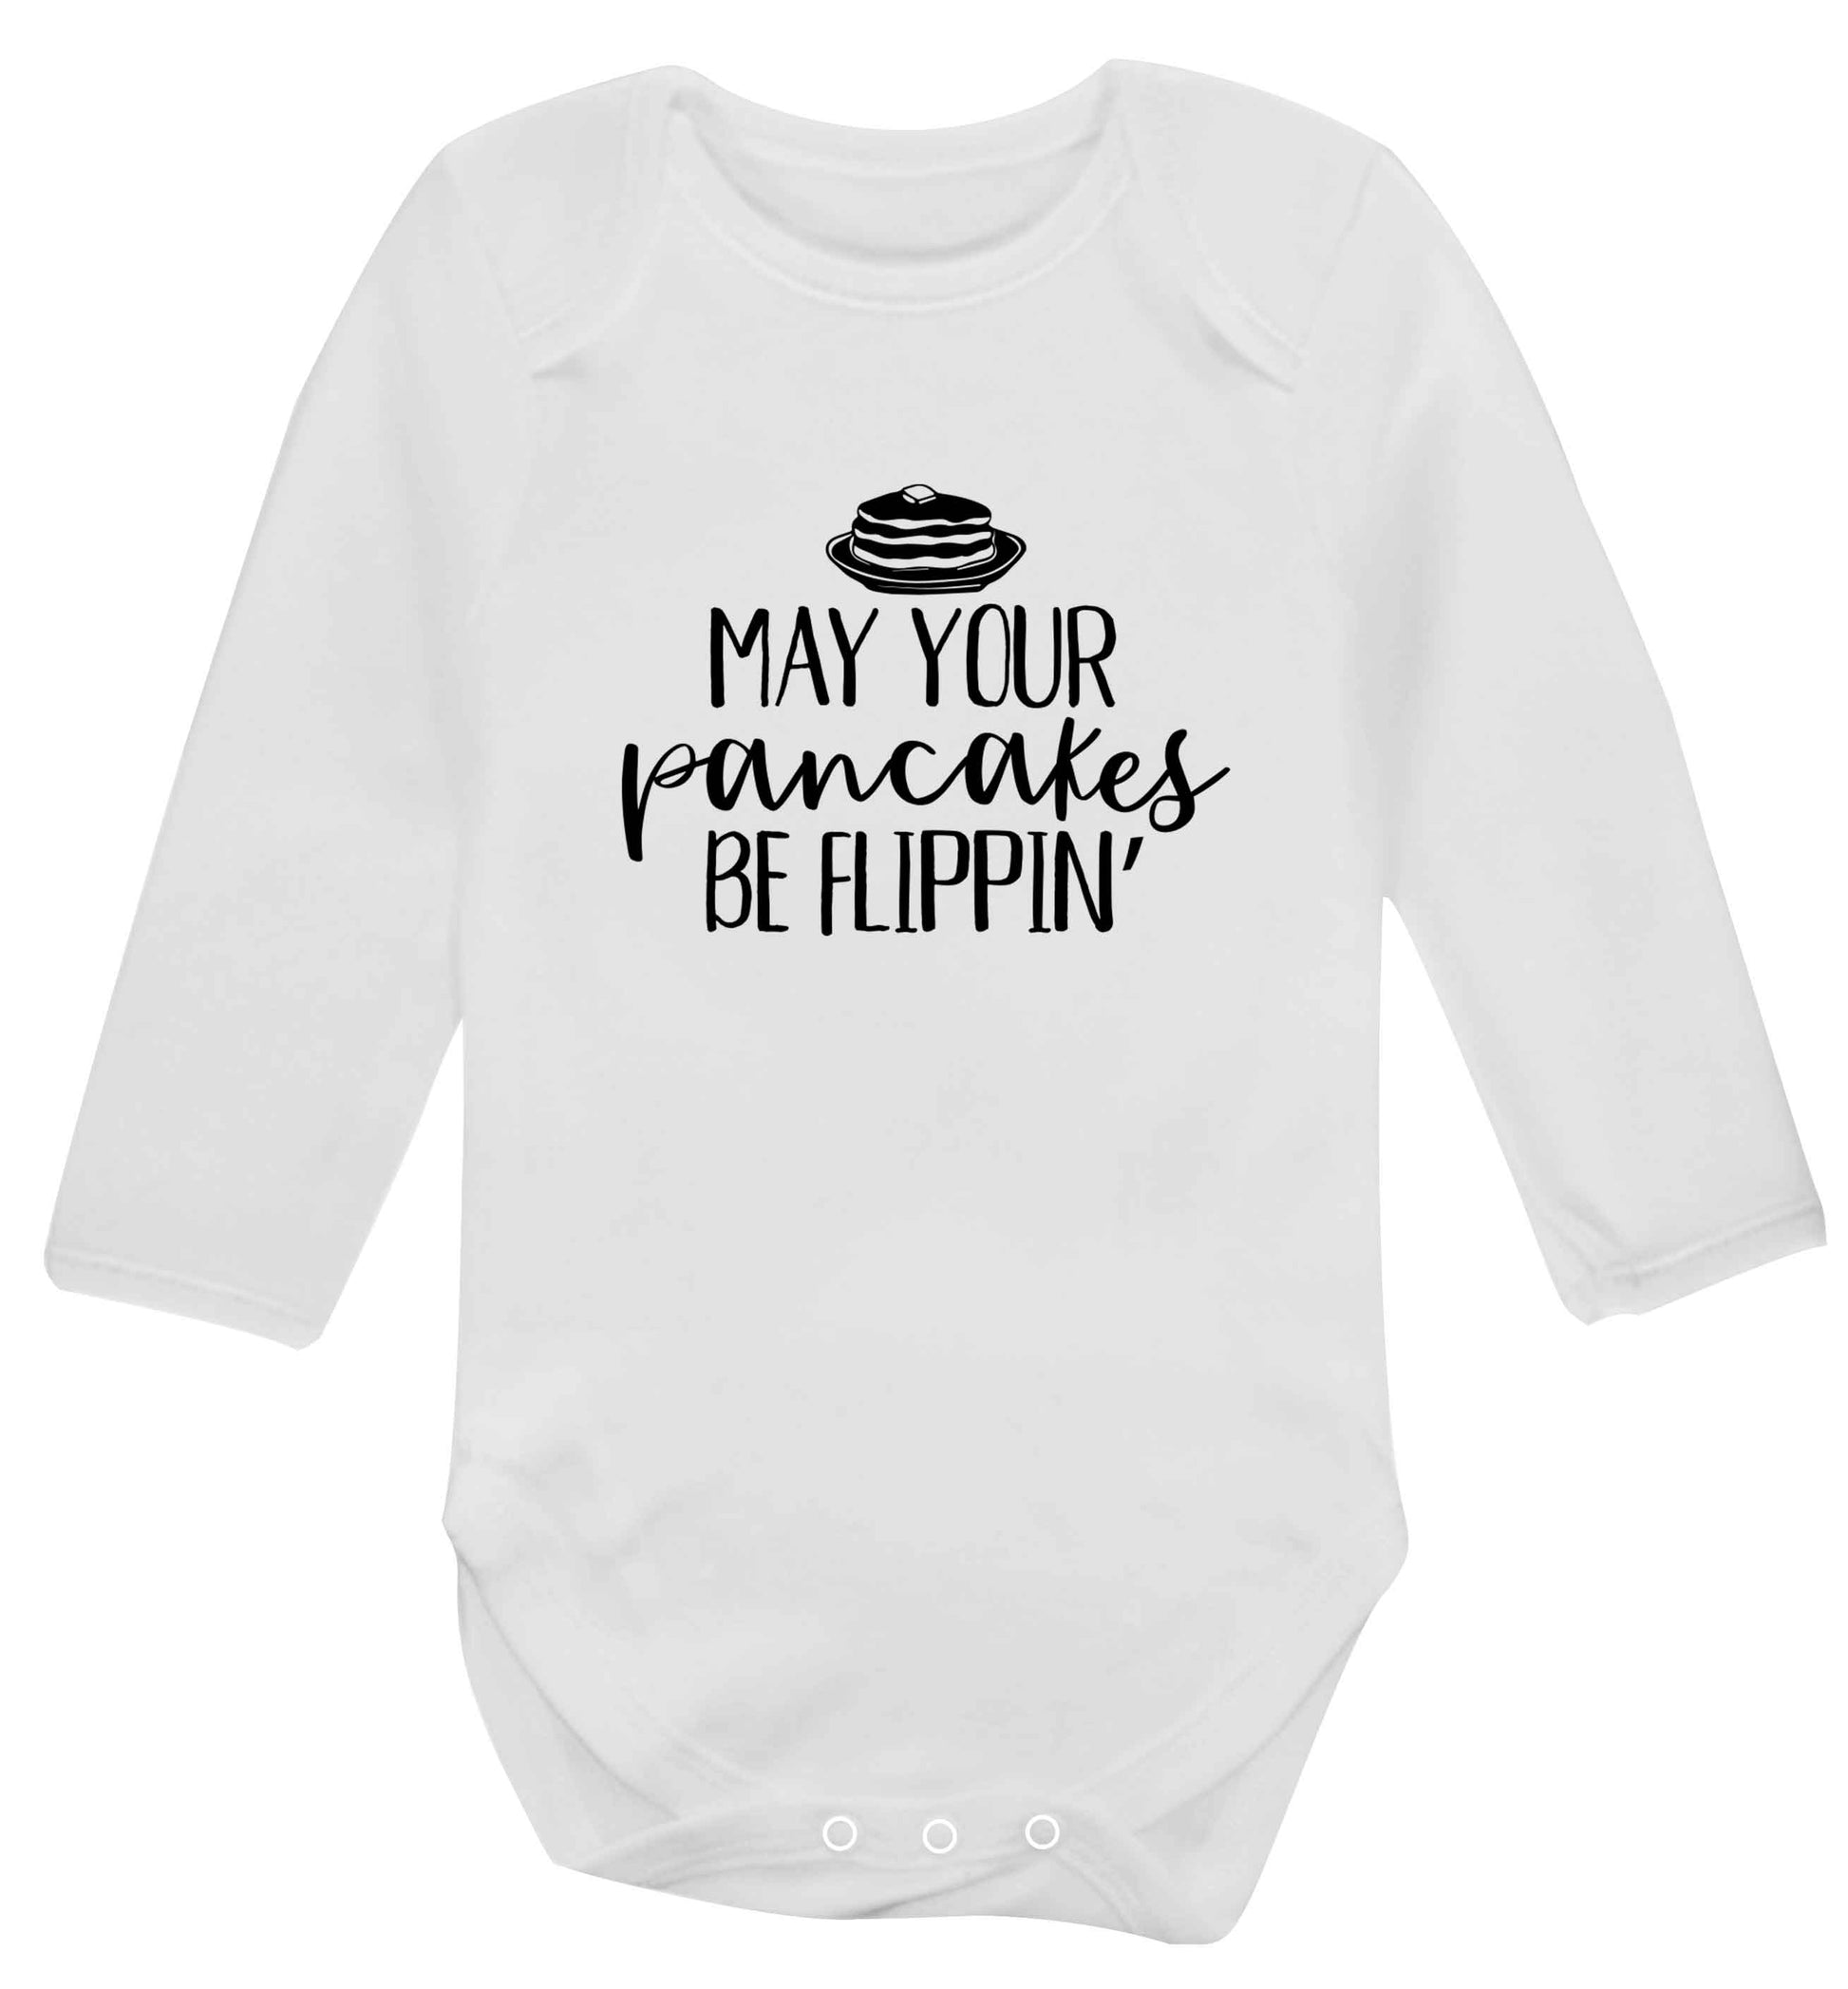 May your pancakes be flippin' baby vest long sleeved white 6-12 months